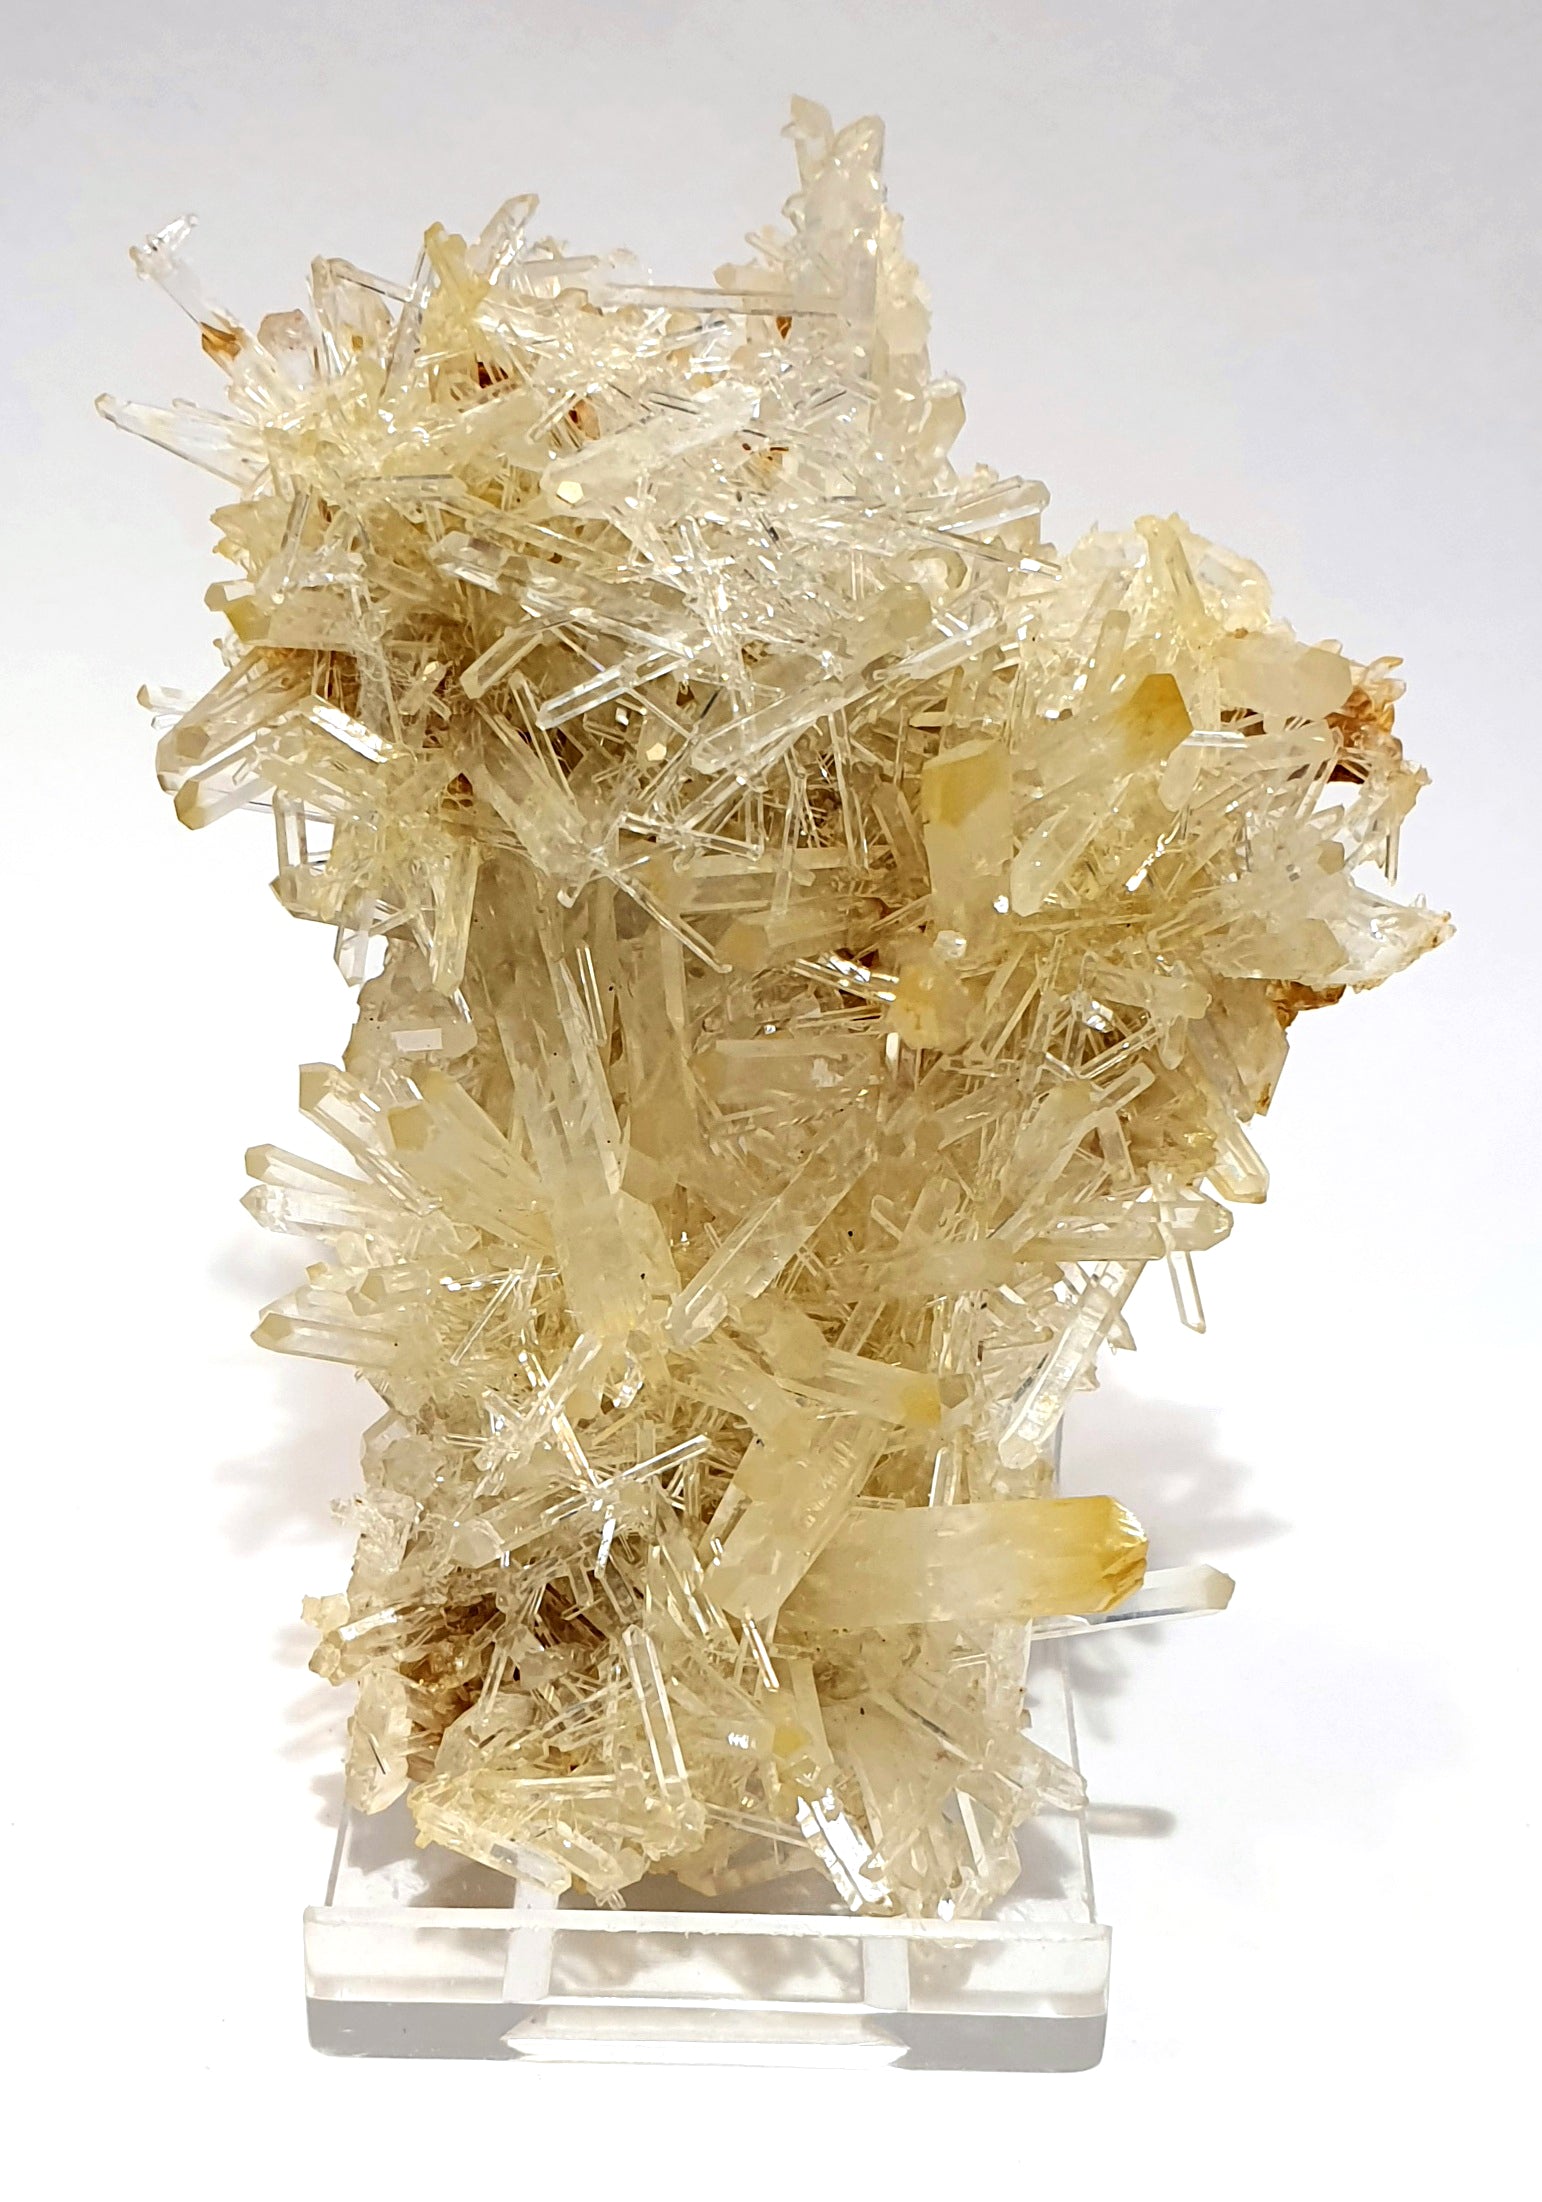 Mango Quartz is crystal clear with yellow tips, fine quartz fingers, large points with crown effect. White with yellow/orange tips irregular shape